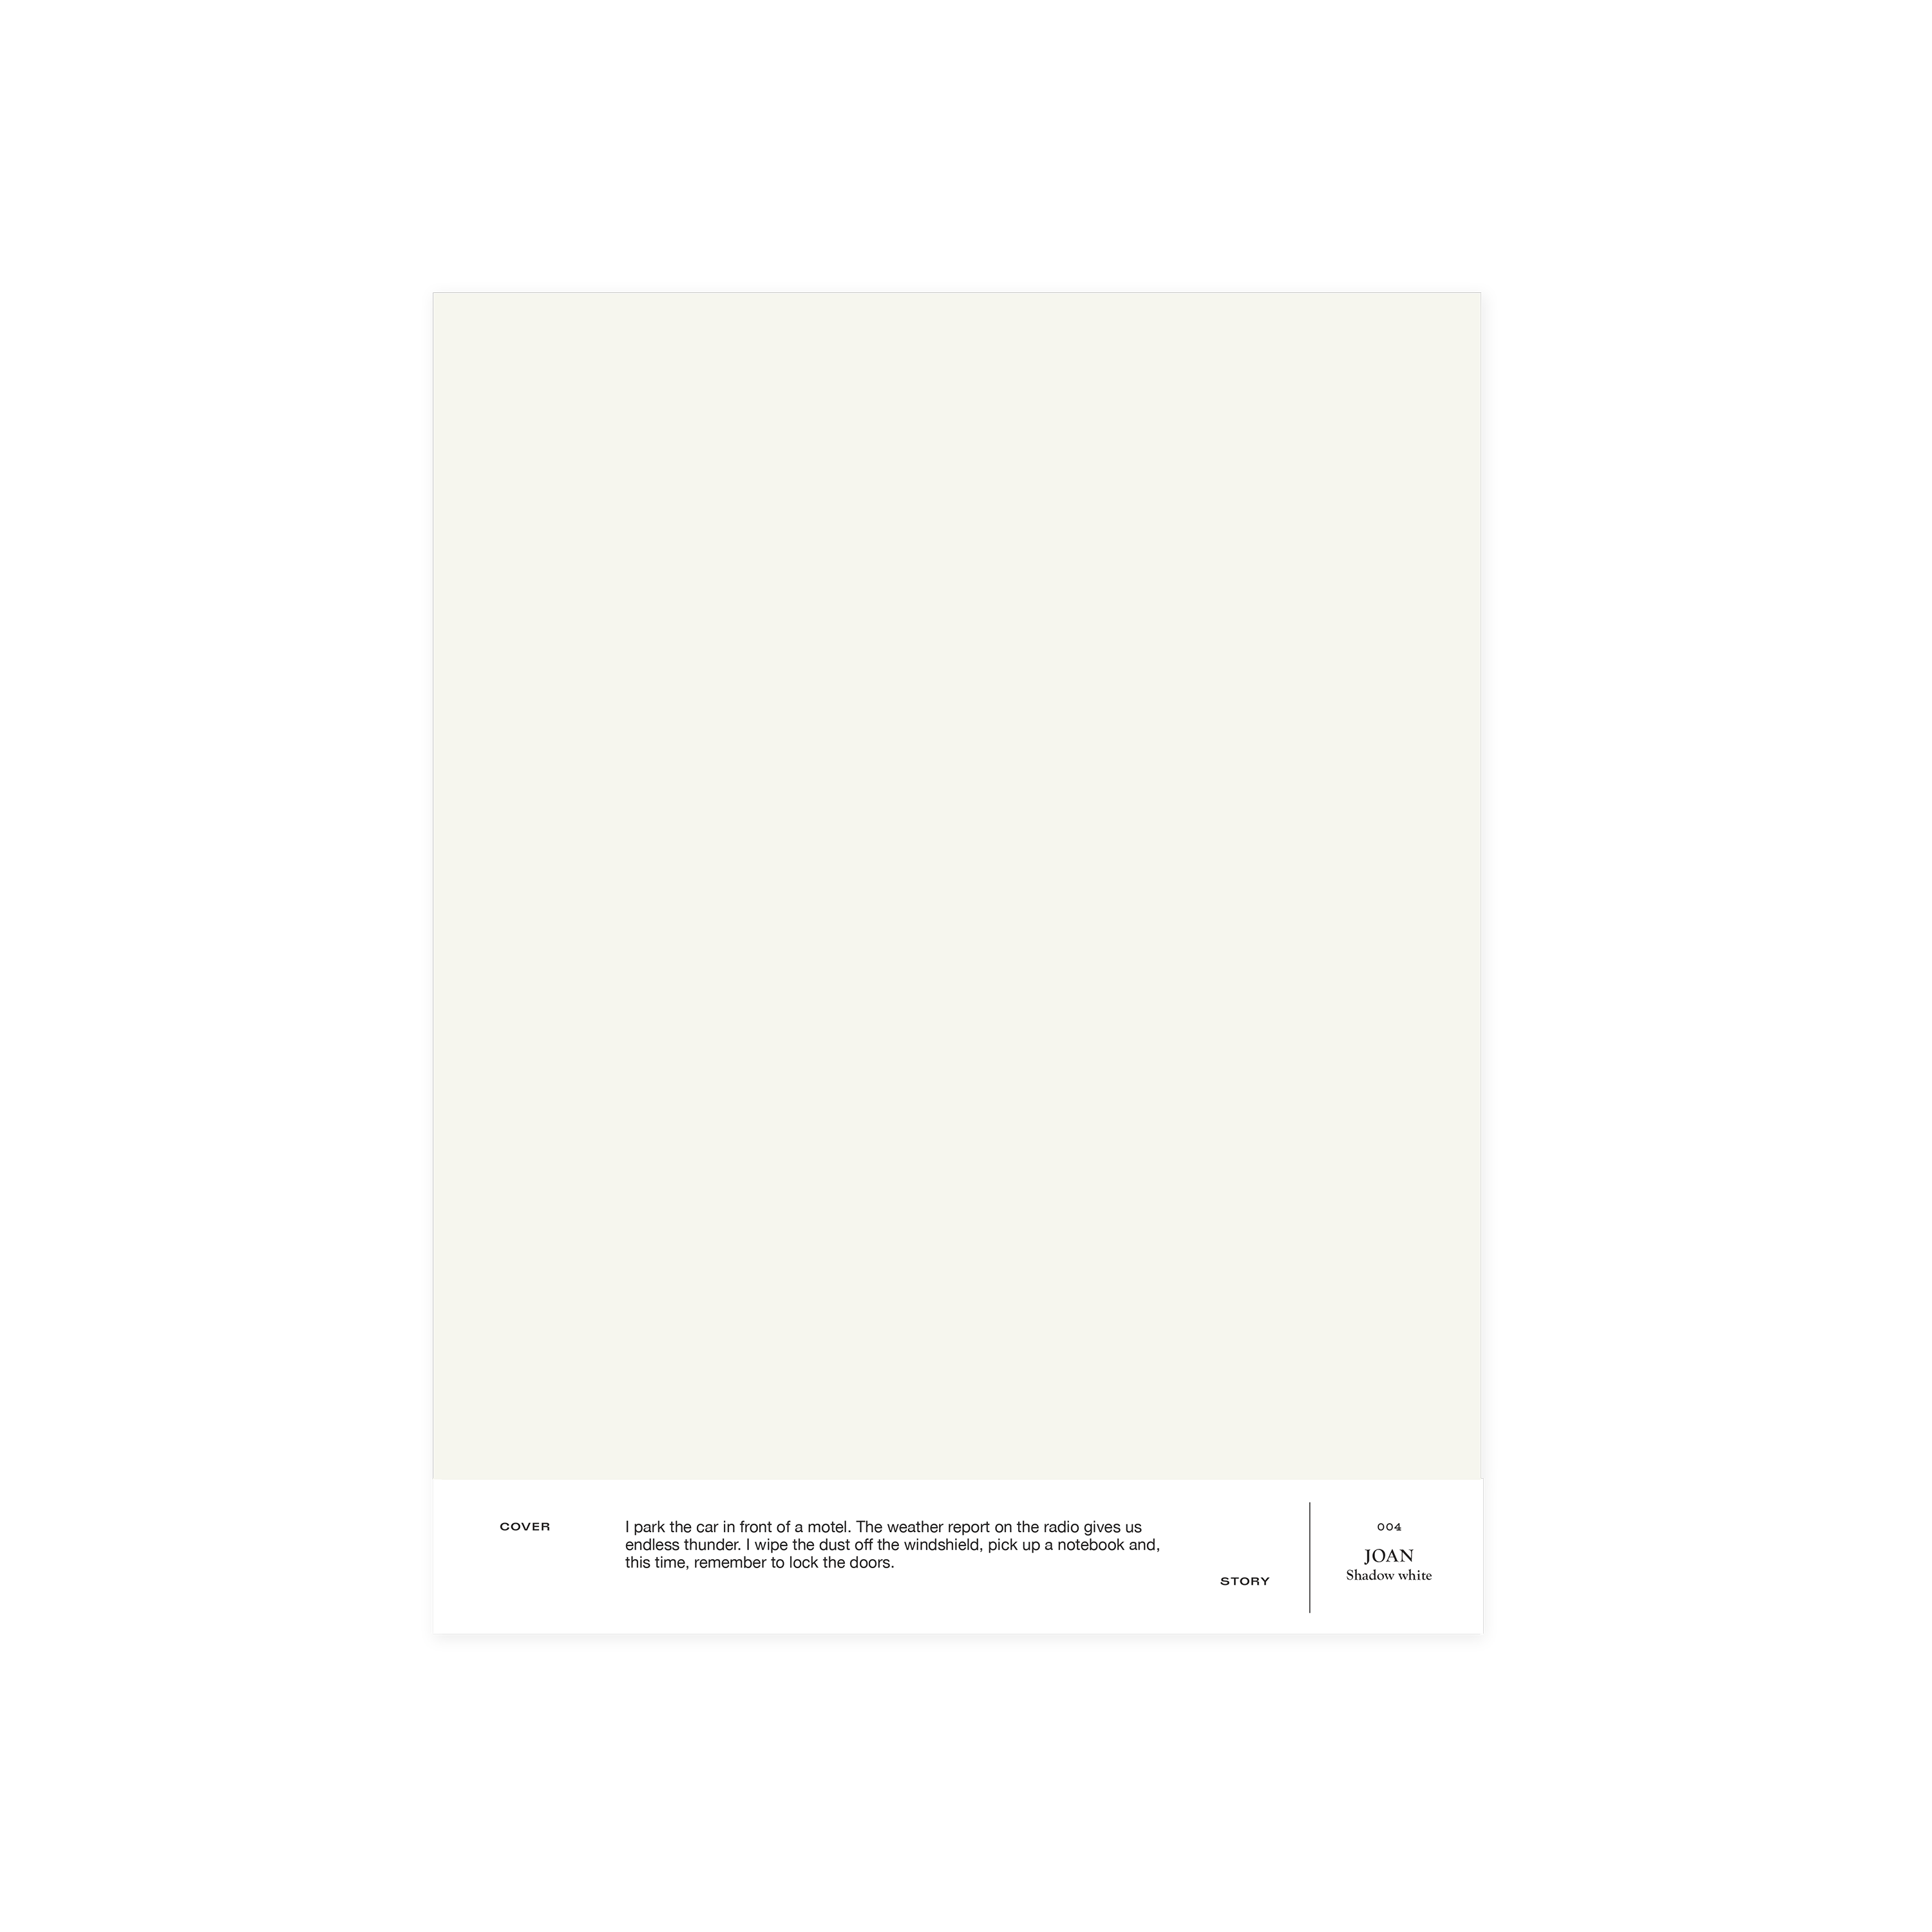 Shadow white interior paint Cover Story 004 JOAN